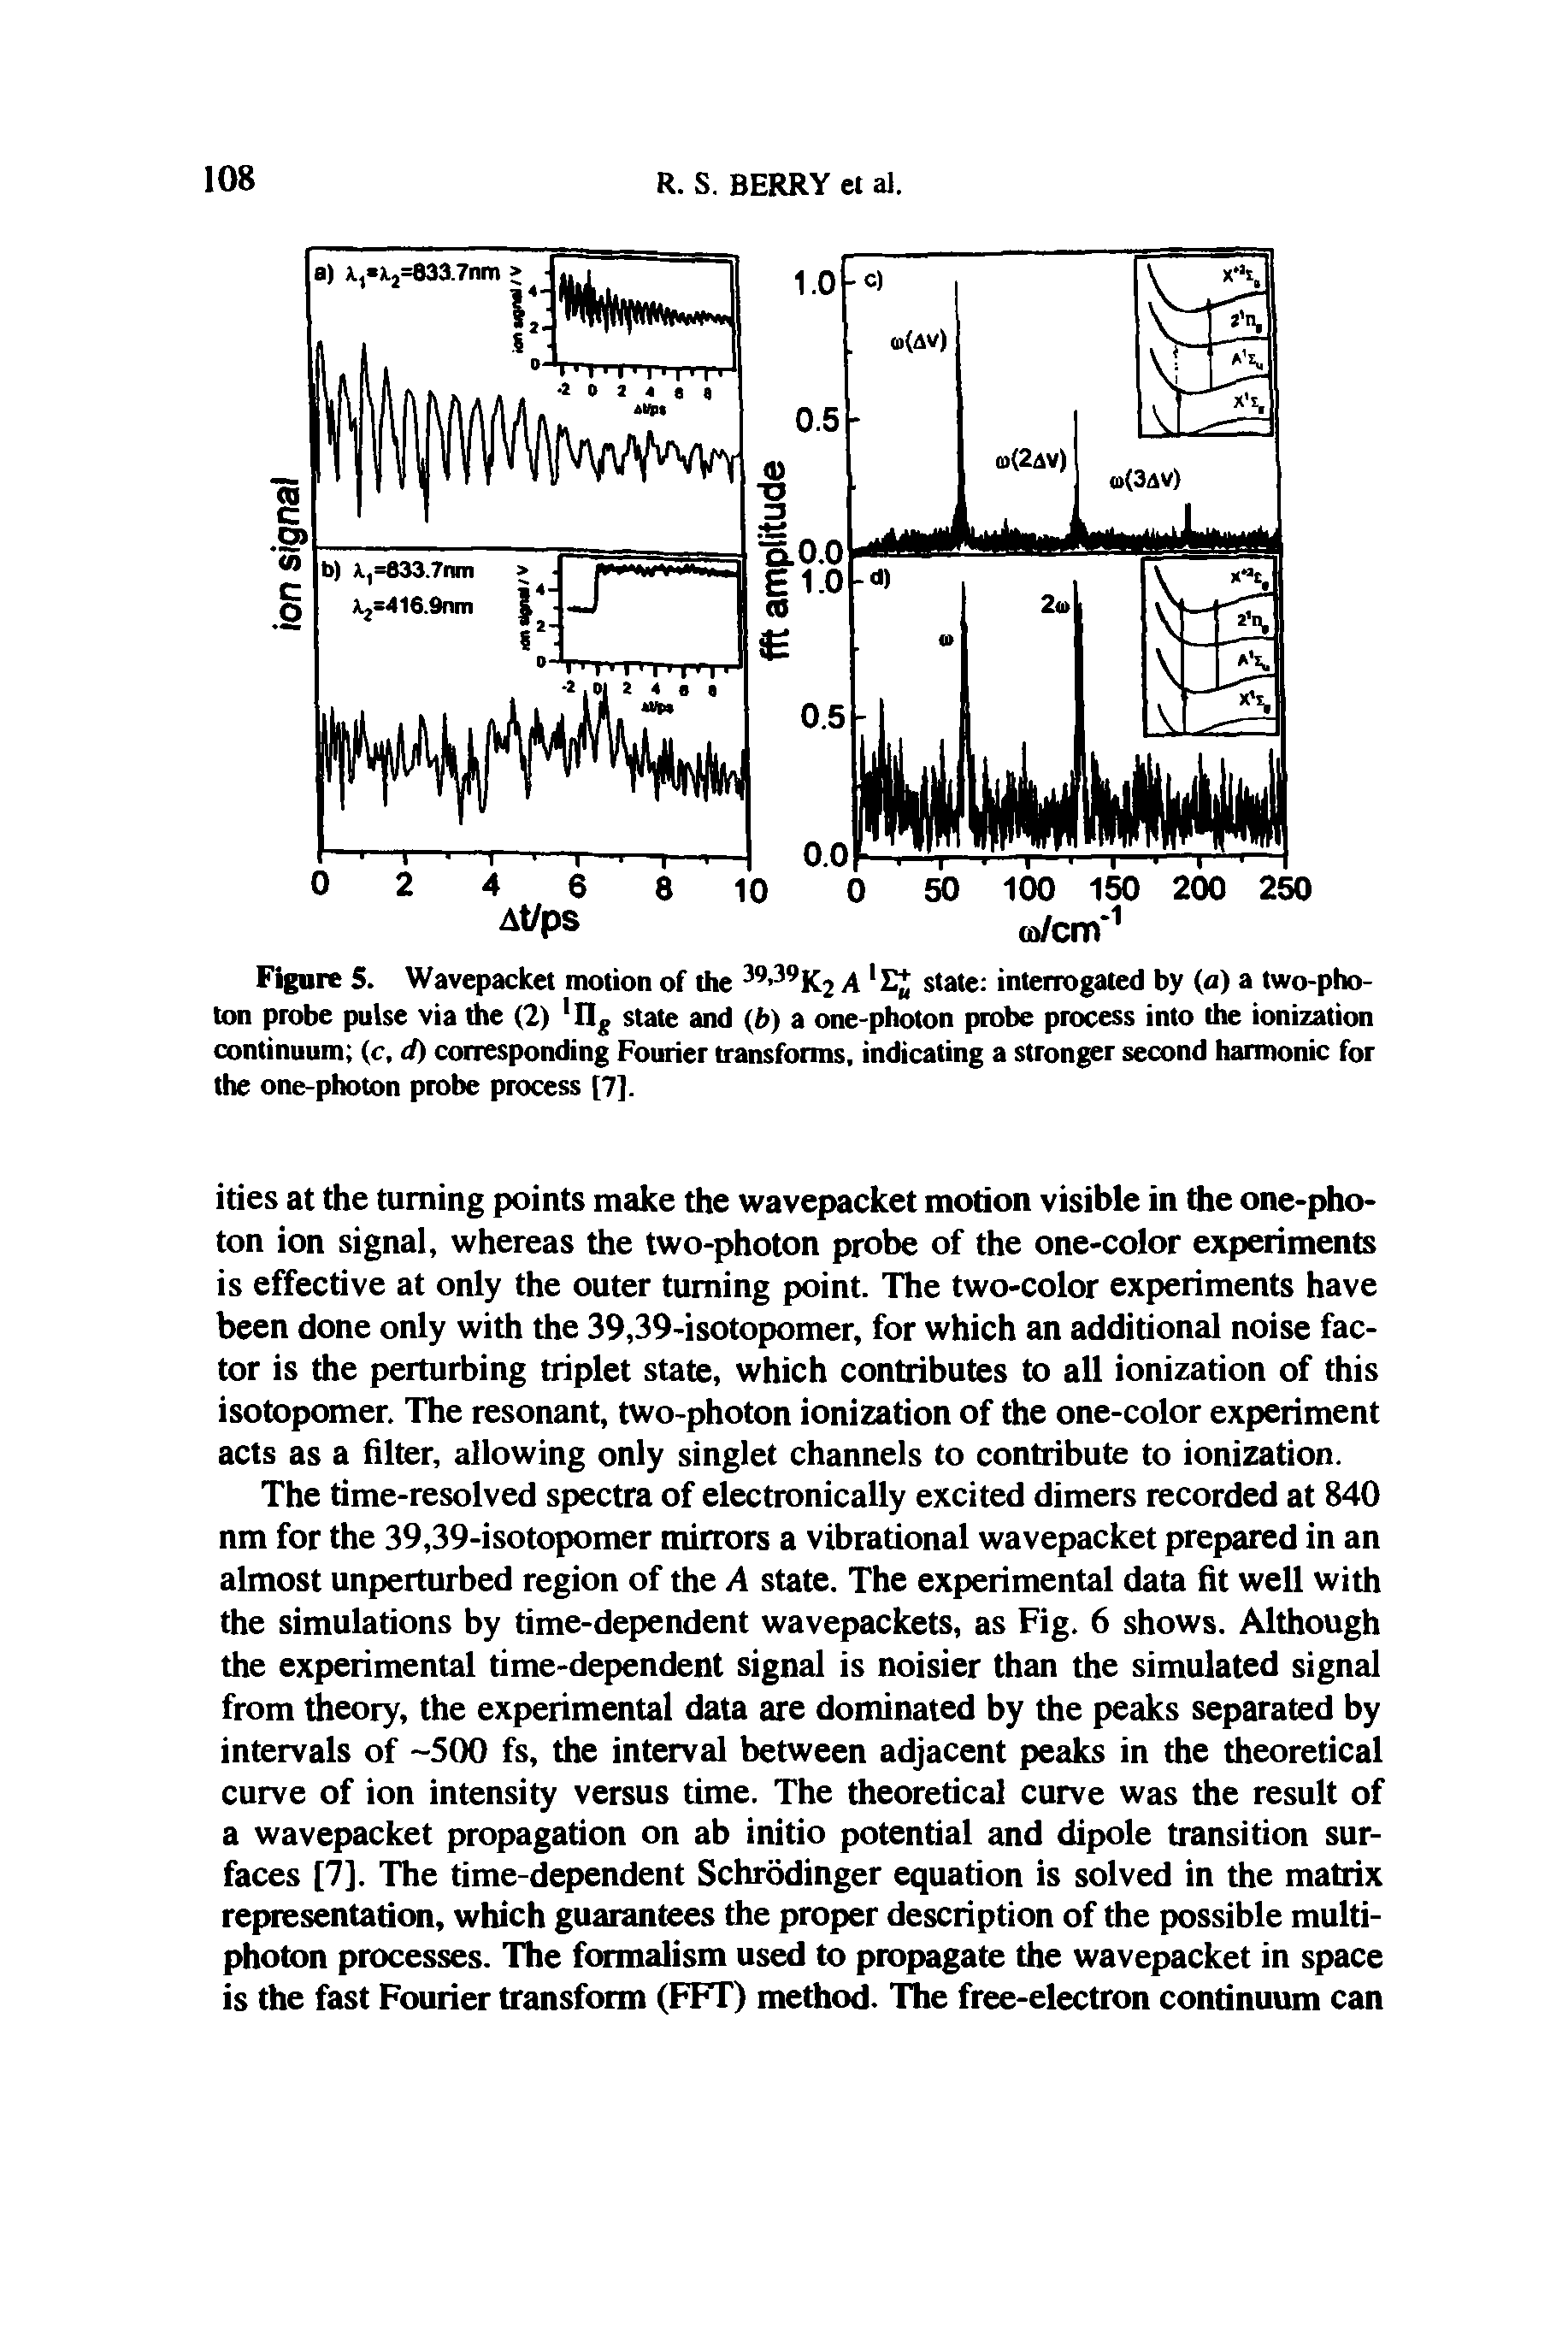 Figure 5. Wavepacket motion of the 39,39 K2 A state interrogated by (a) a two-photon probe pulse via the (2) 1 IIg state and (i>) a one-photon probe process into the ionization continuum (c, d) corresponding Fourier transforms, indicating a stronger second harmonic for the one-photon probe process [7].